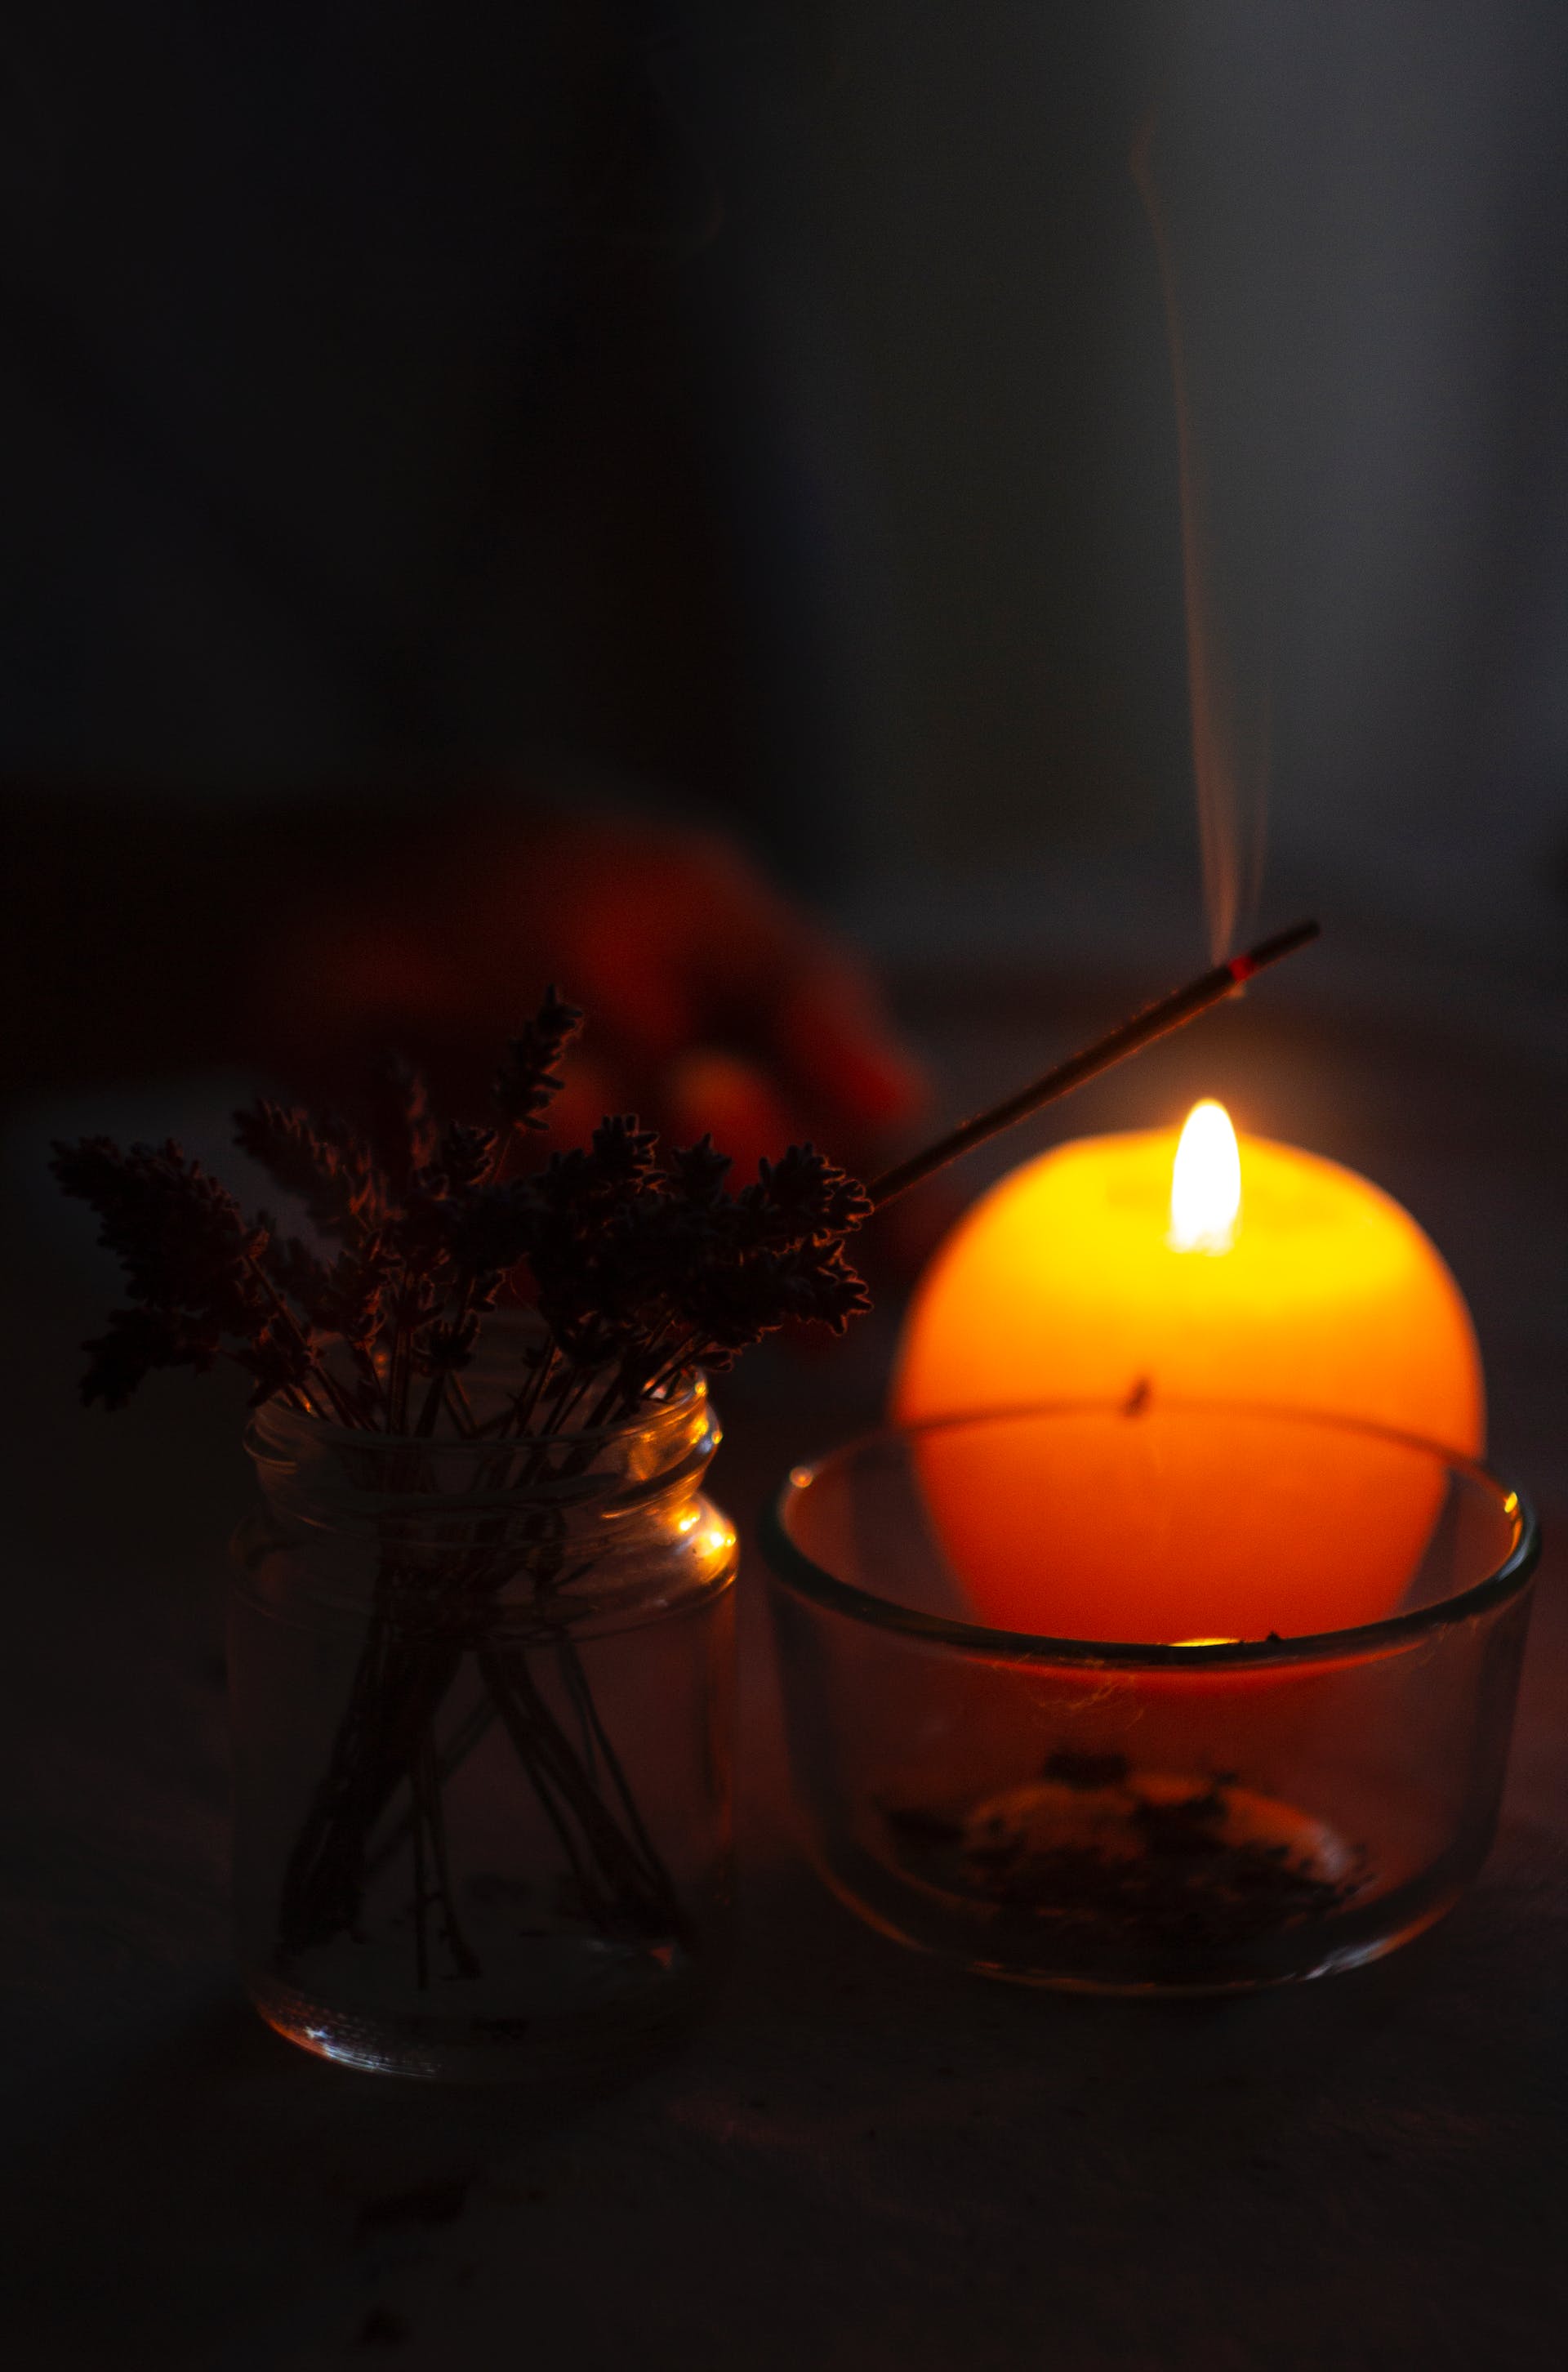 Incense and candle | Source: Pexels